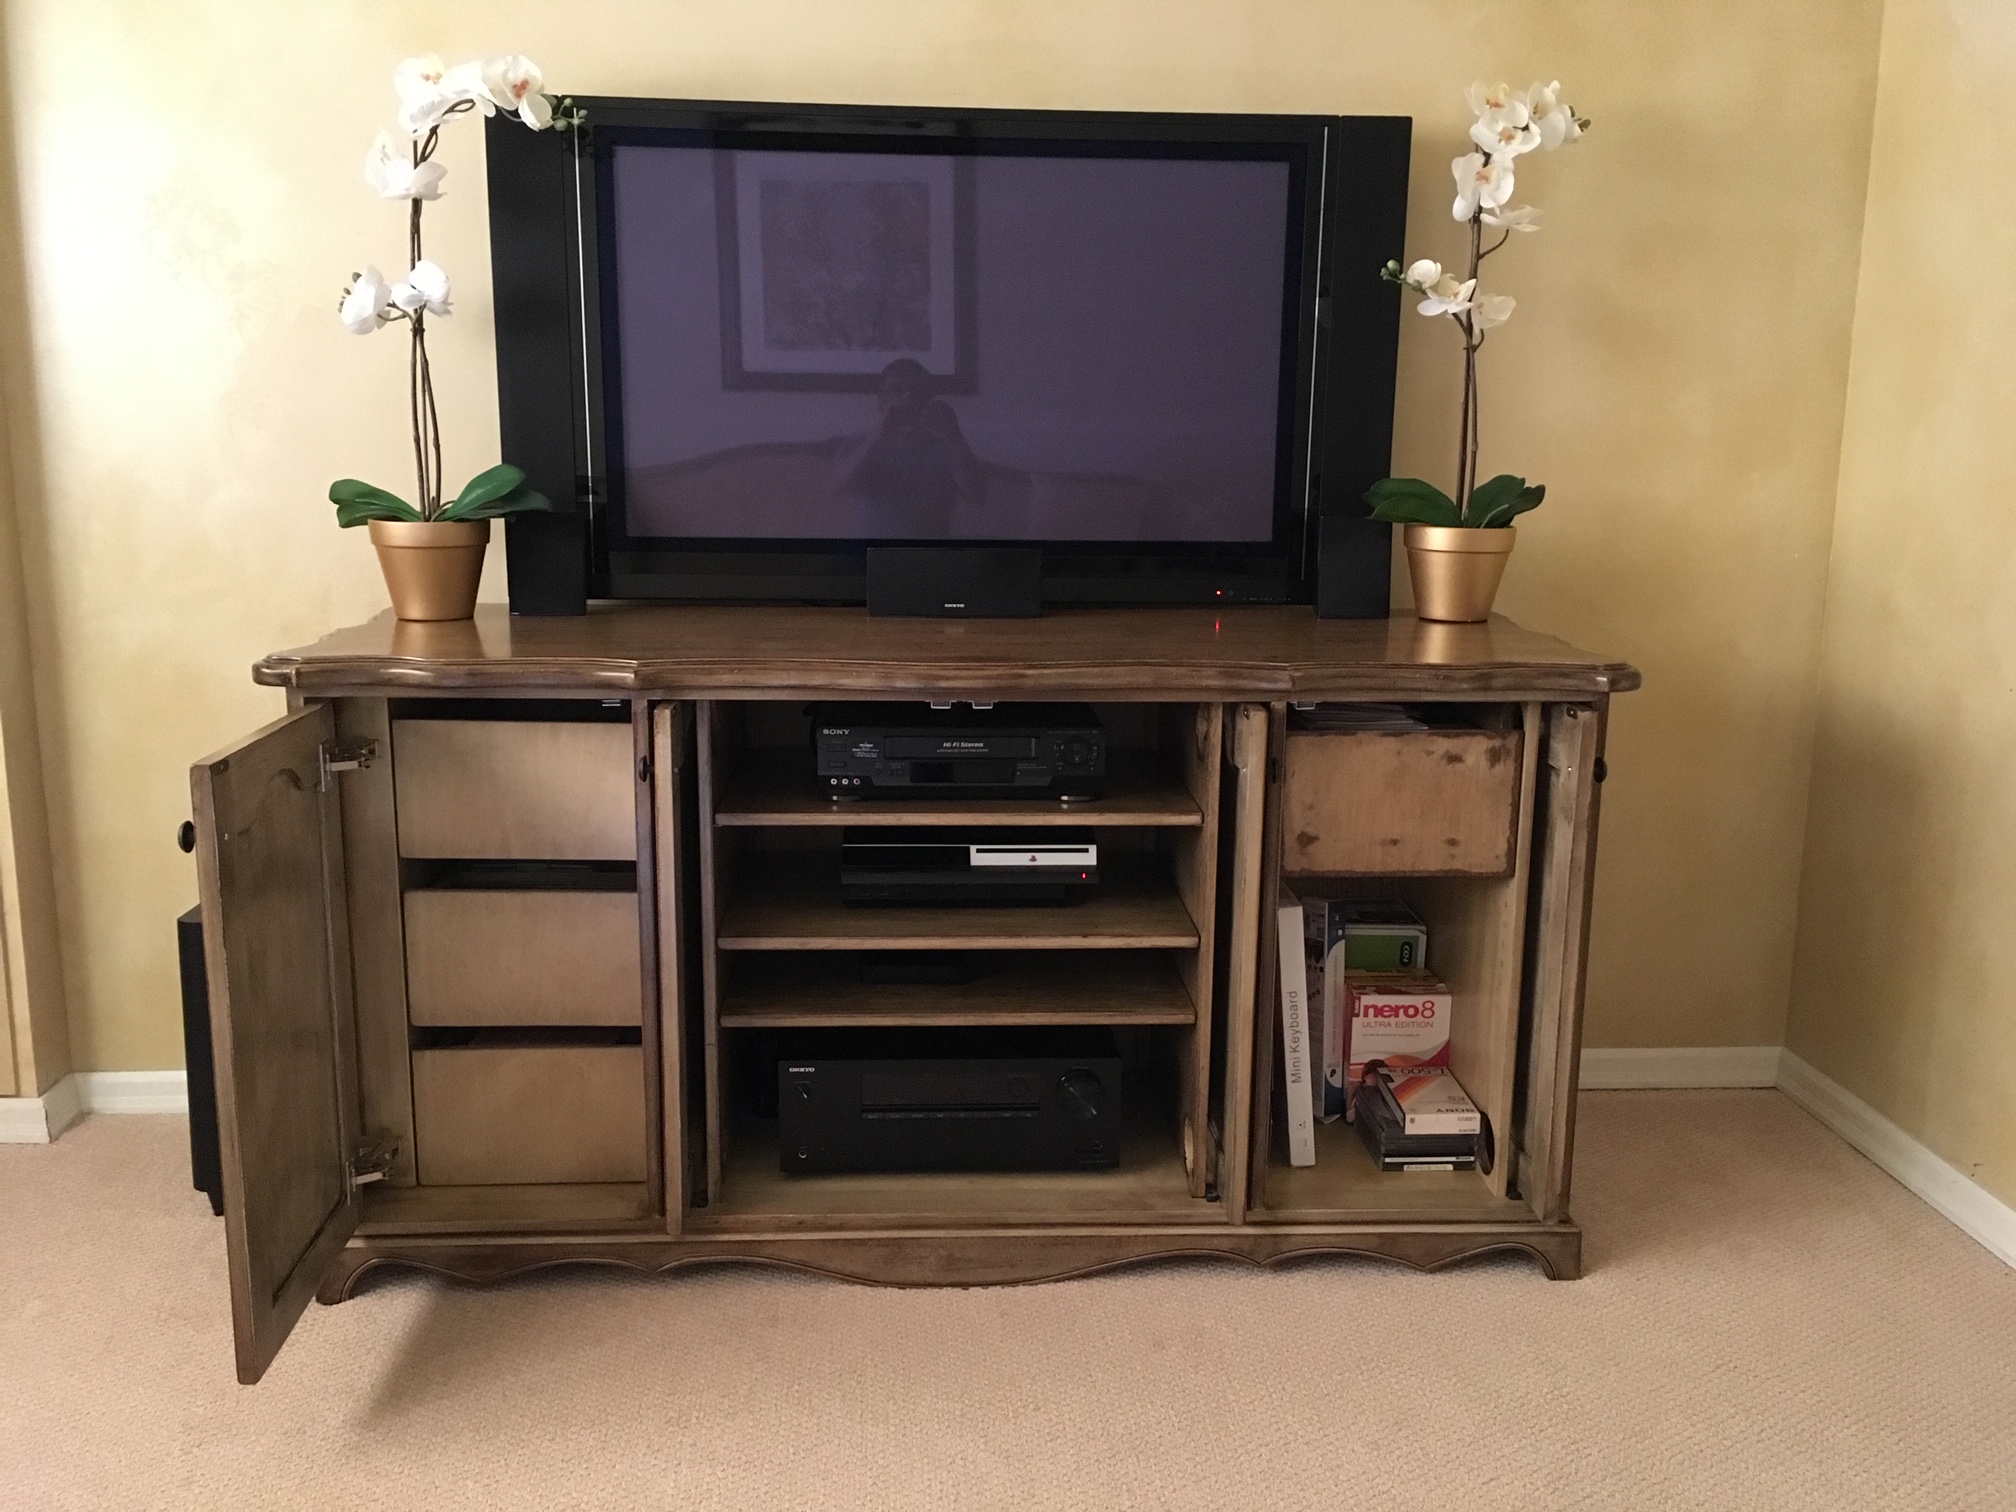 Custom made solid maple wood TV unit - AM Furniture in Surrey, New Westminster, Burnaby, Vancouver, Coquitlam